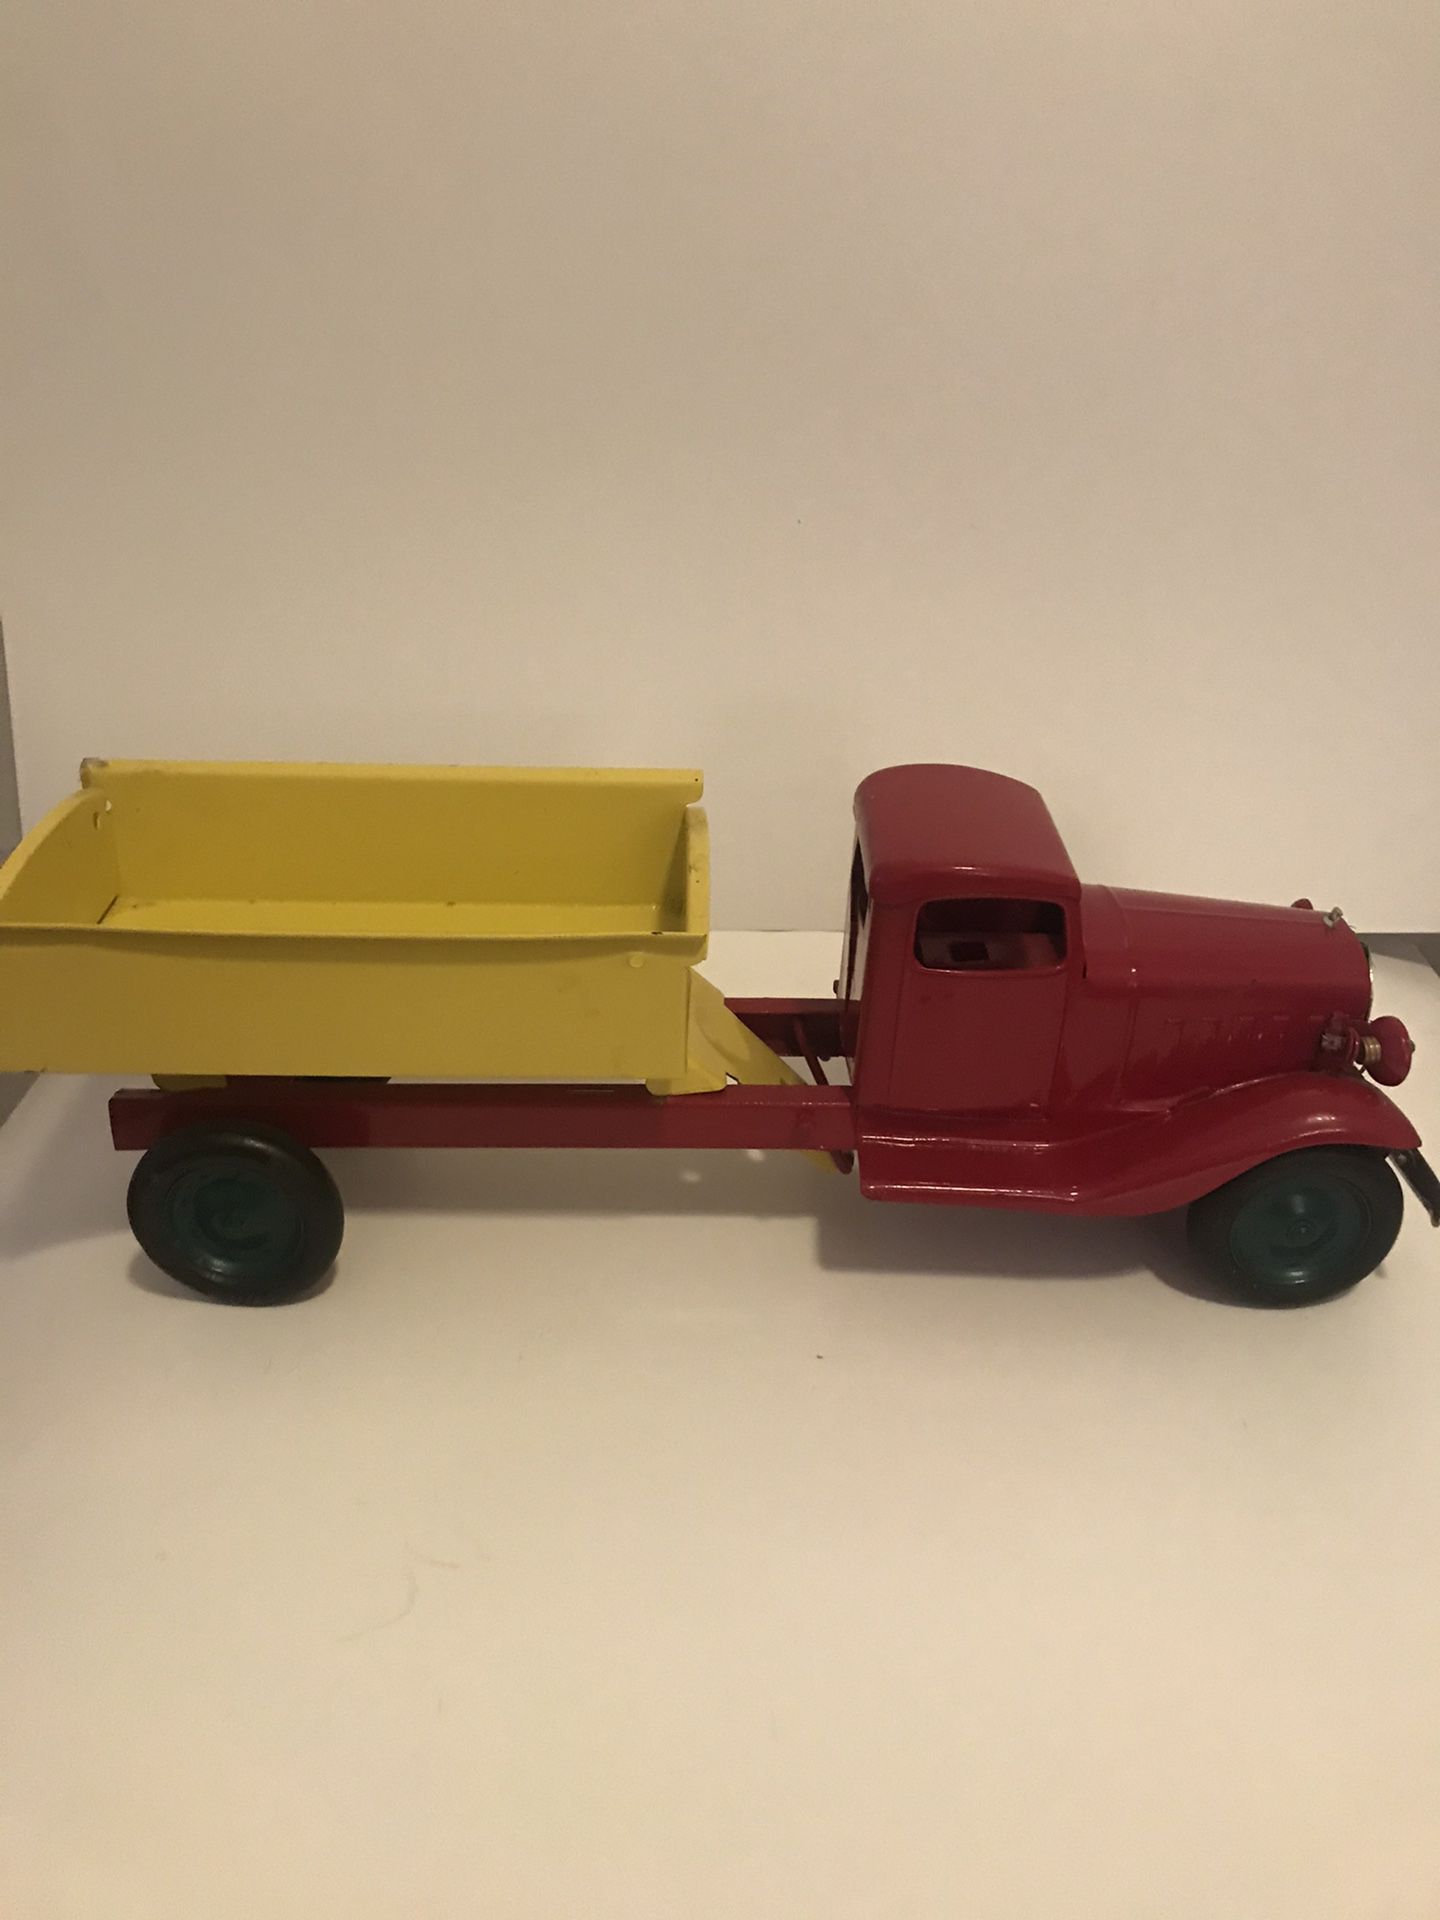 Vintage and Rare Turner Toys Pressed Metal Red and Yellow Dump Truck with Battery Slot for Working Headlights 18in Length 6in Height Normal Wear Rubb